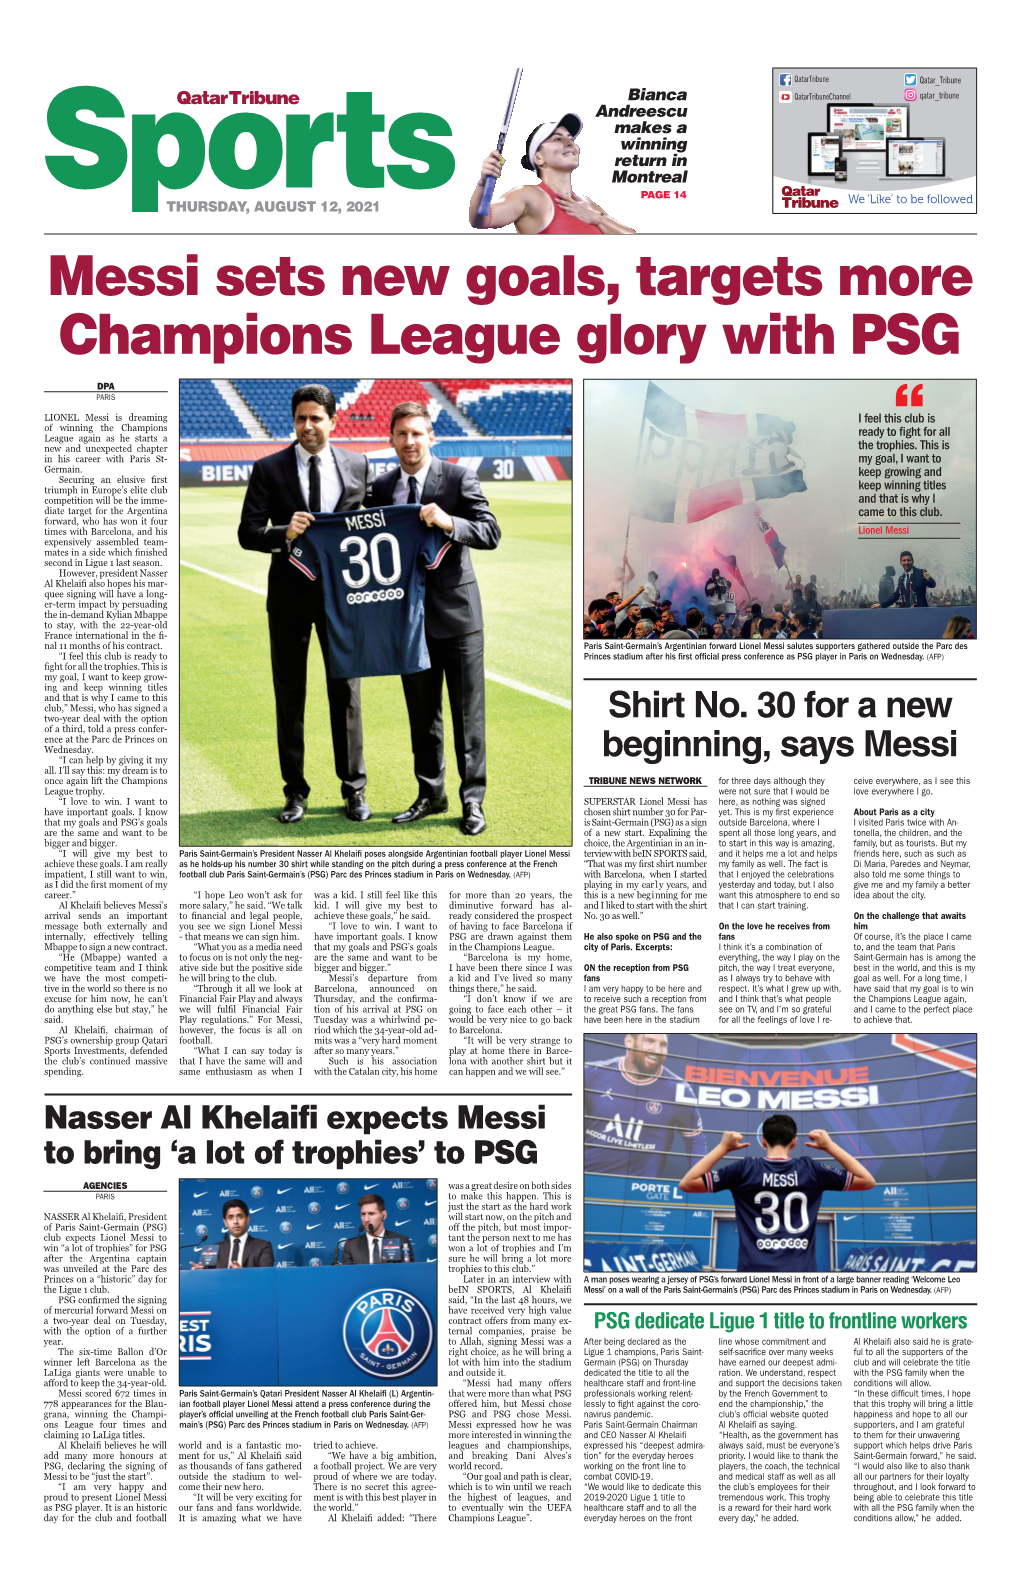 Messi Sets New Goals, Targets More Champions League Glory with PSG